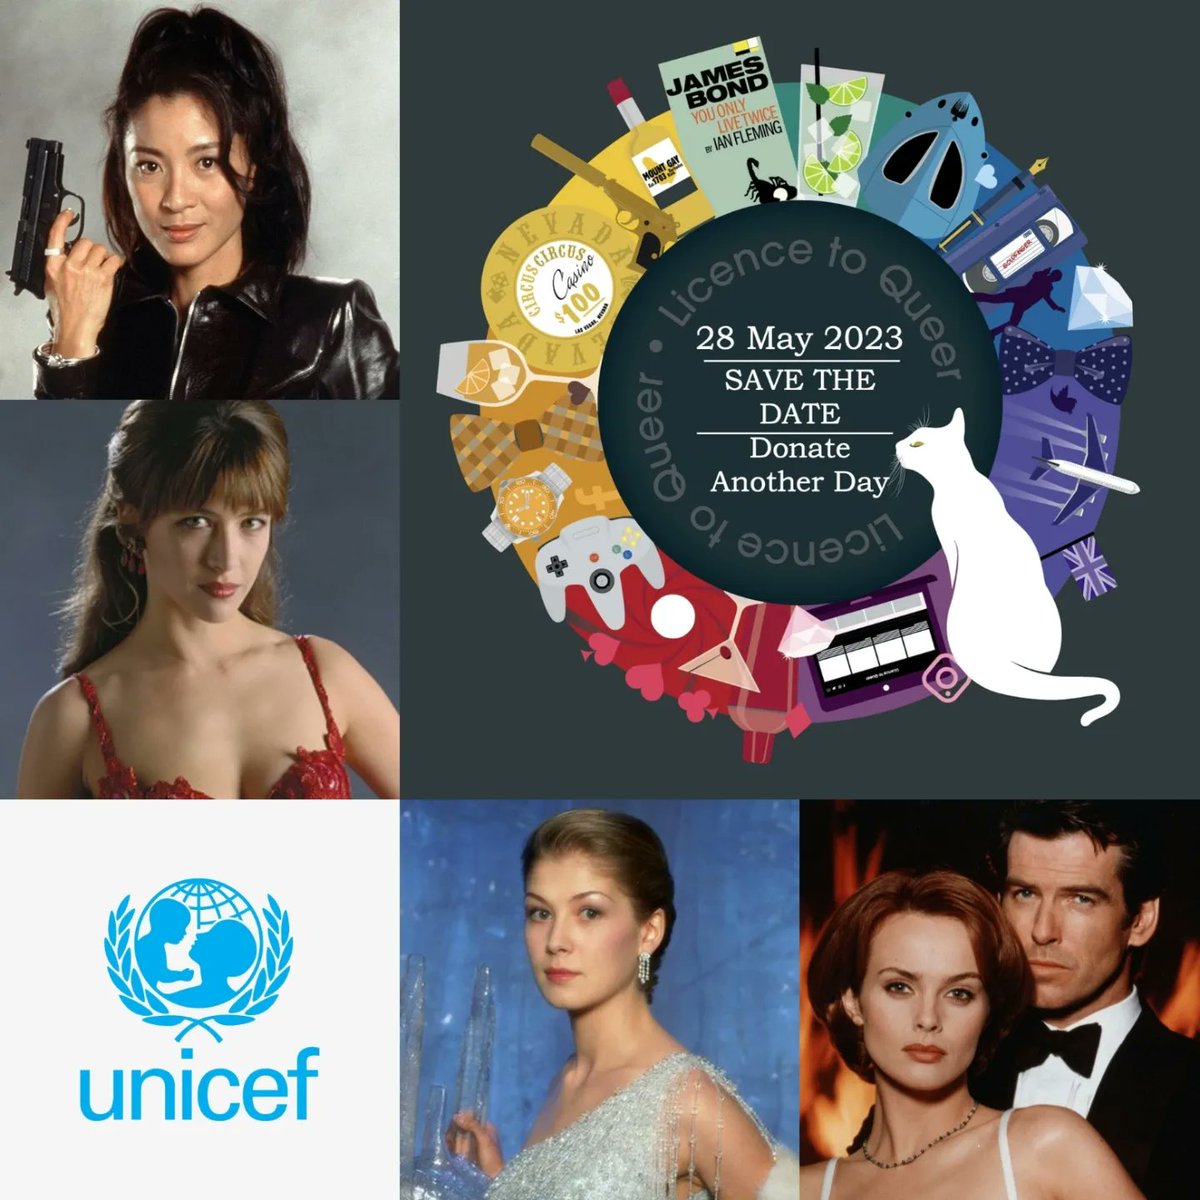 Save the date for #DonateAnotherDay!

Last year, more than 90 Bond fans raised over £2700 in a single day for Roger Moore’s beloved UNICEF. On 28th May 2023, we're uniting around our love for the Bond films of another UNICEF ambassador: Pierce Brosnan.

licencetoqueer.com/blog/donate-an…